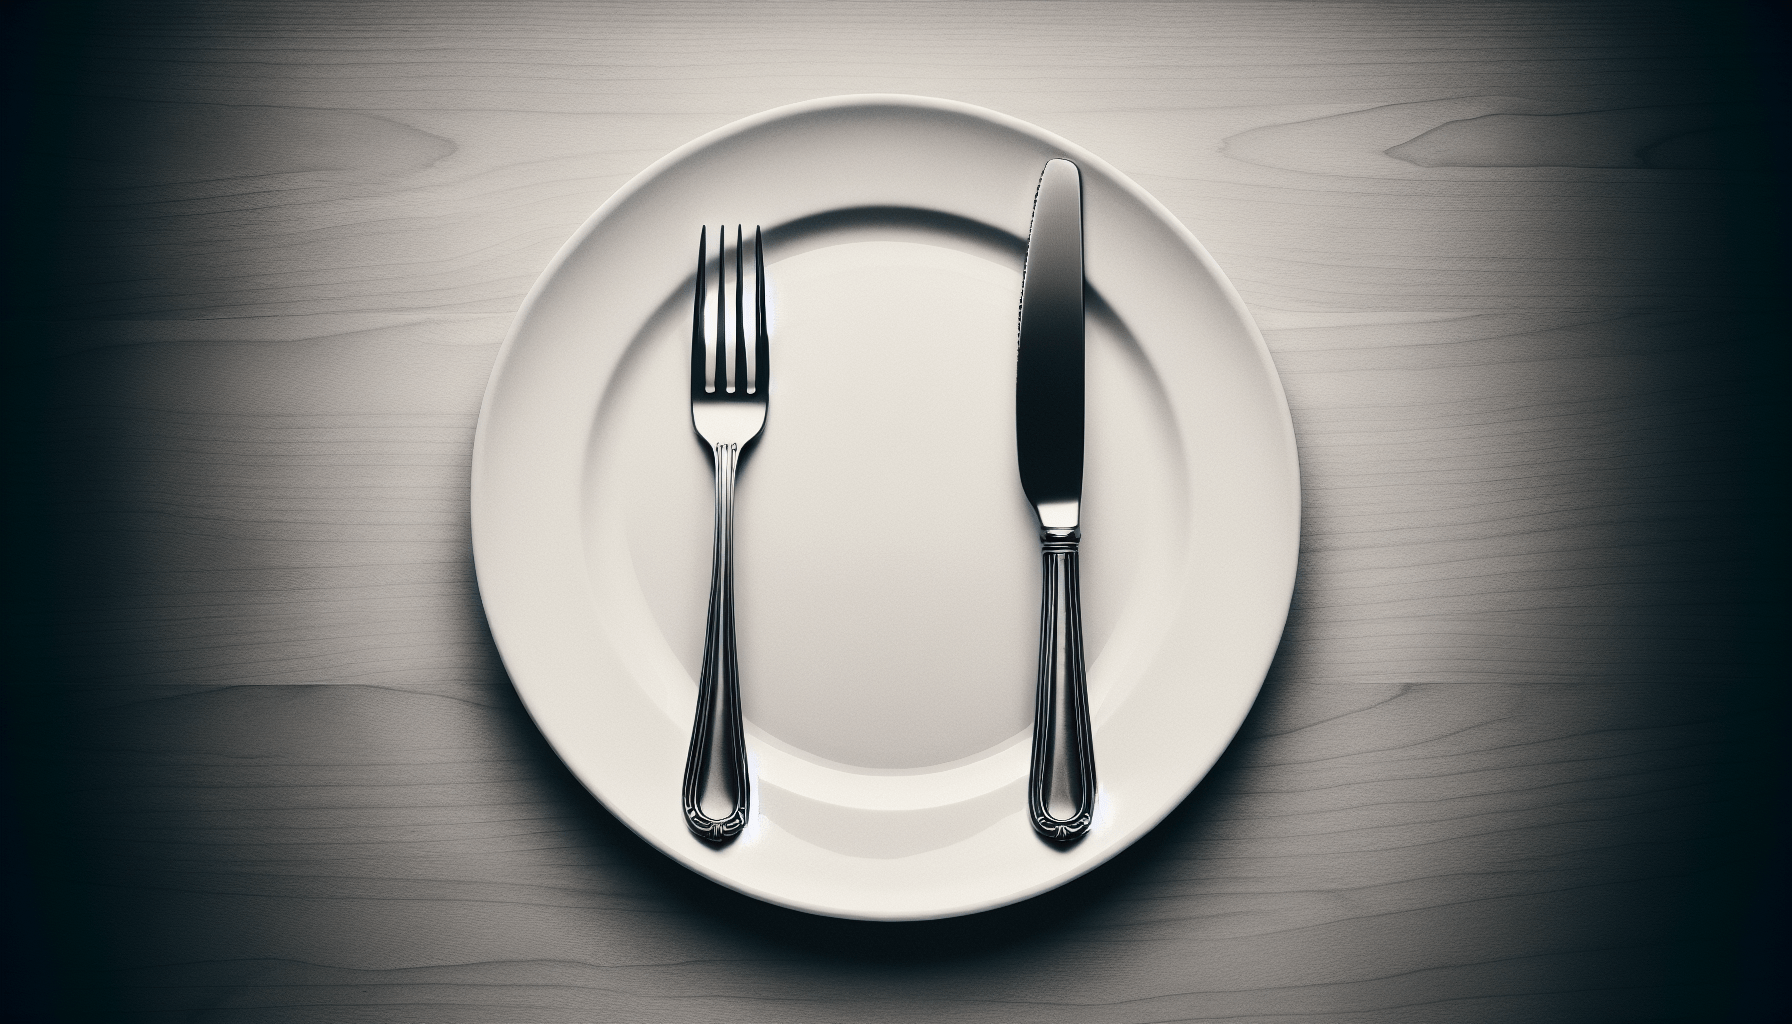 Can Appetite Loss Be An Early Warning Sign Of Underlying Conditions?